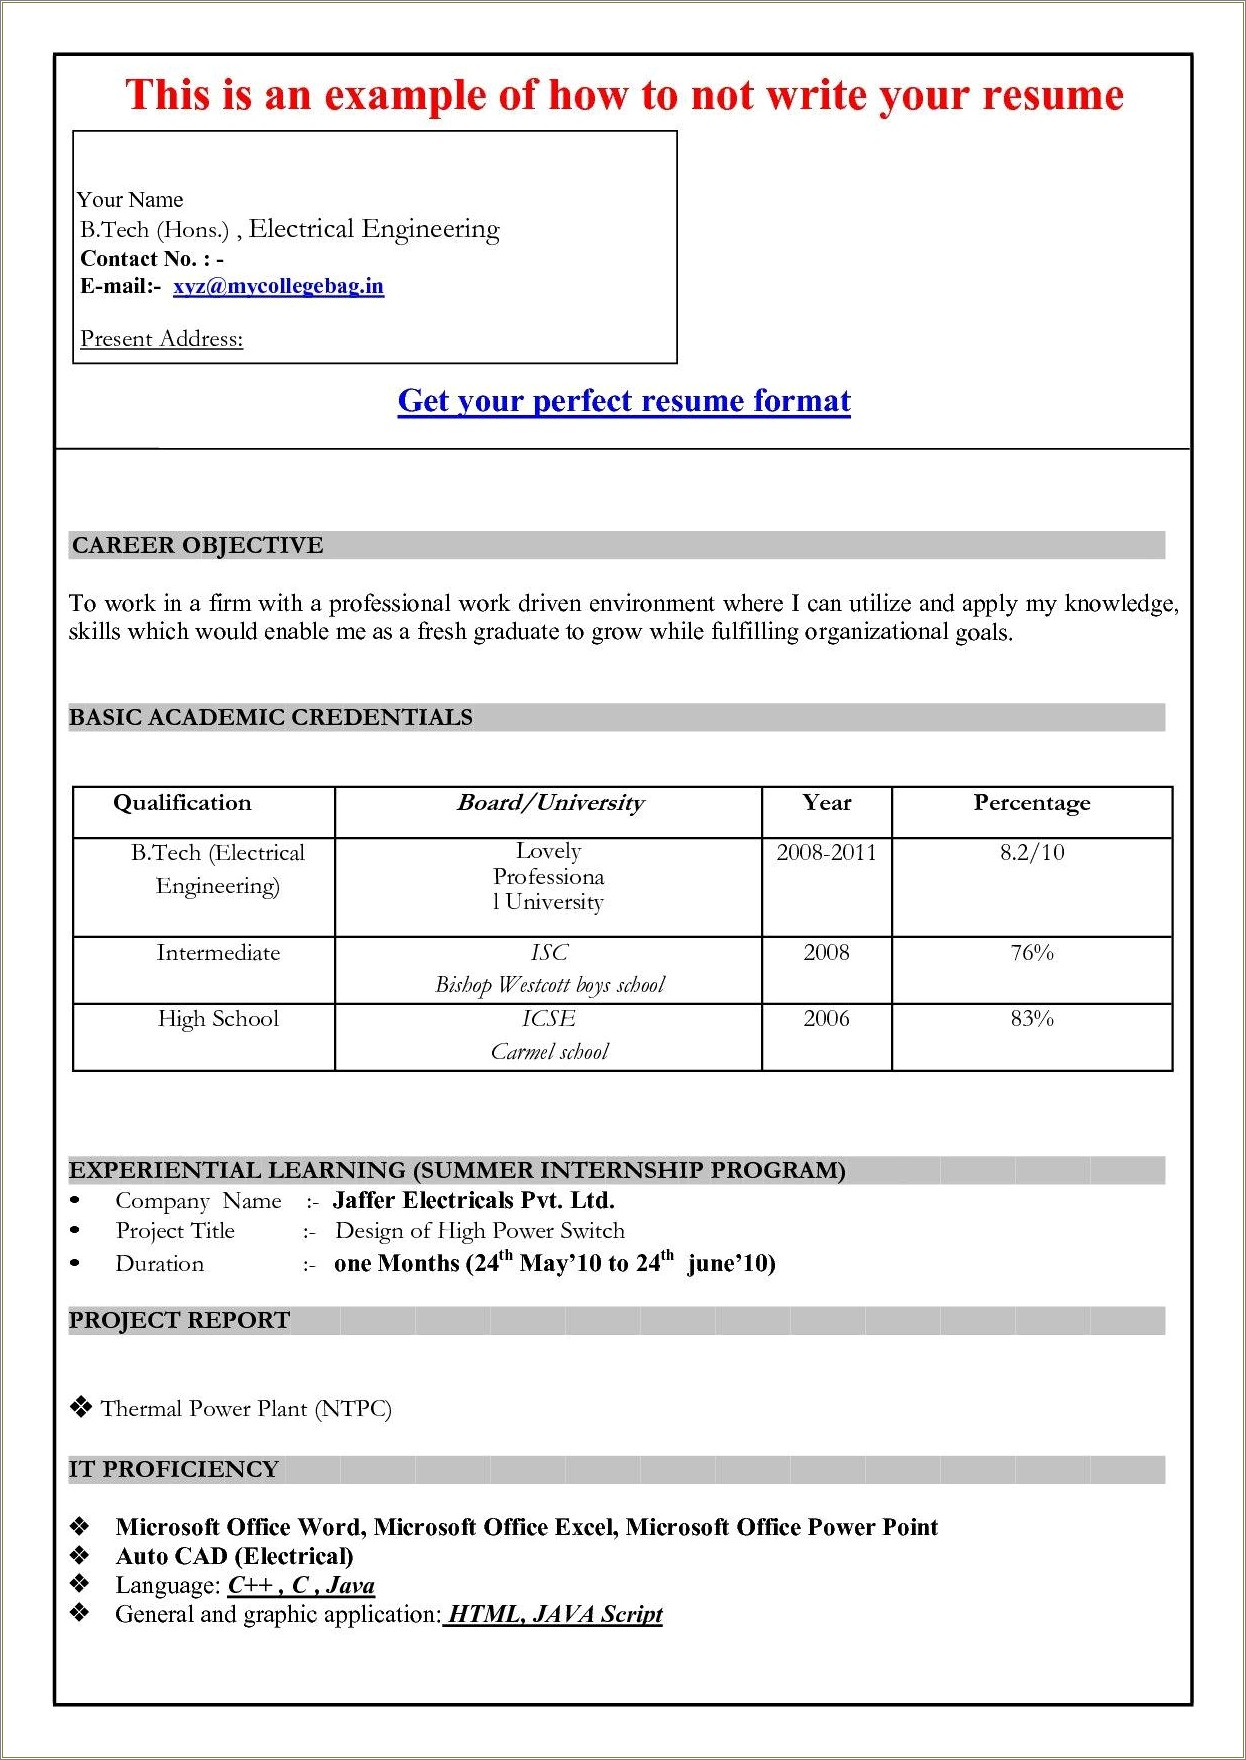 Format Of Resume In Ms Word 2007